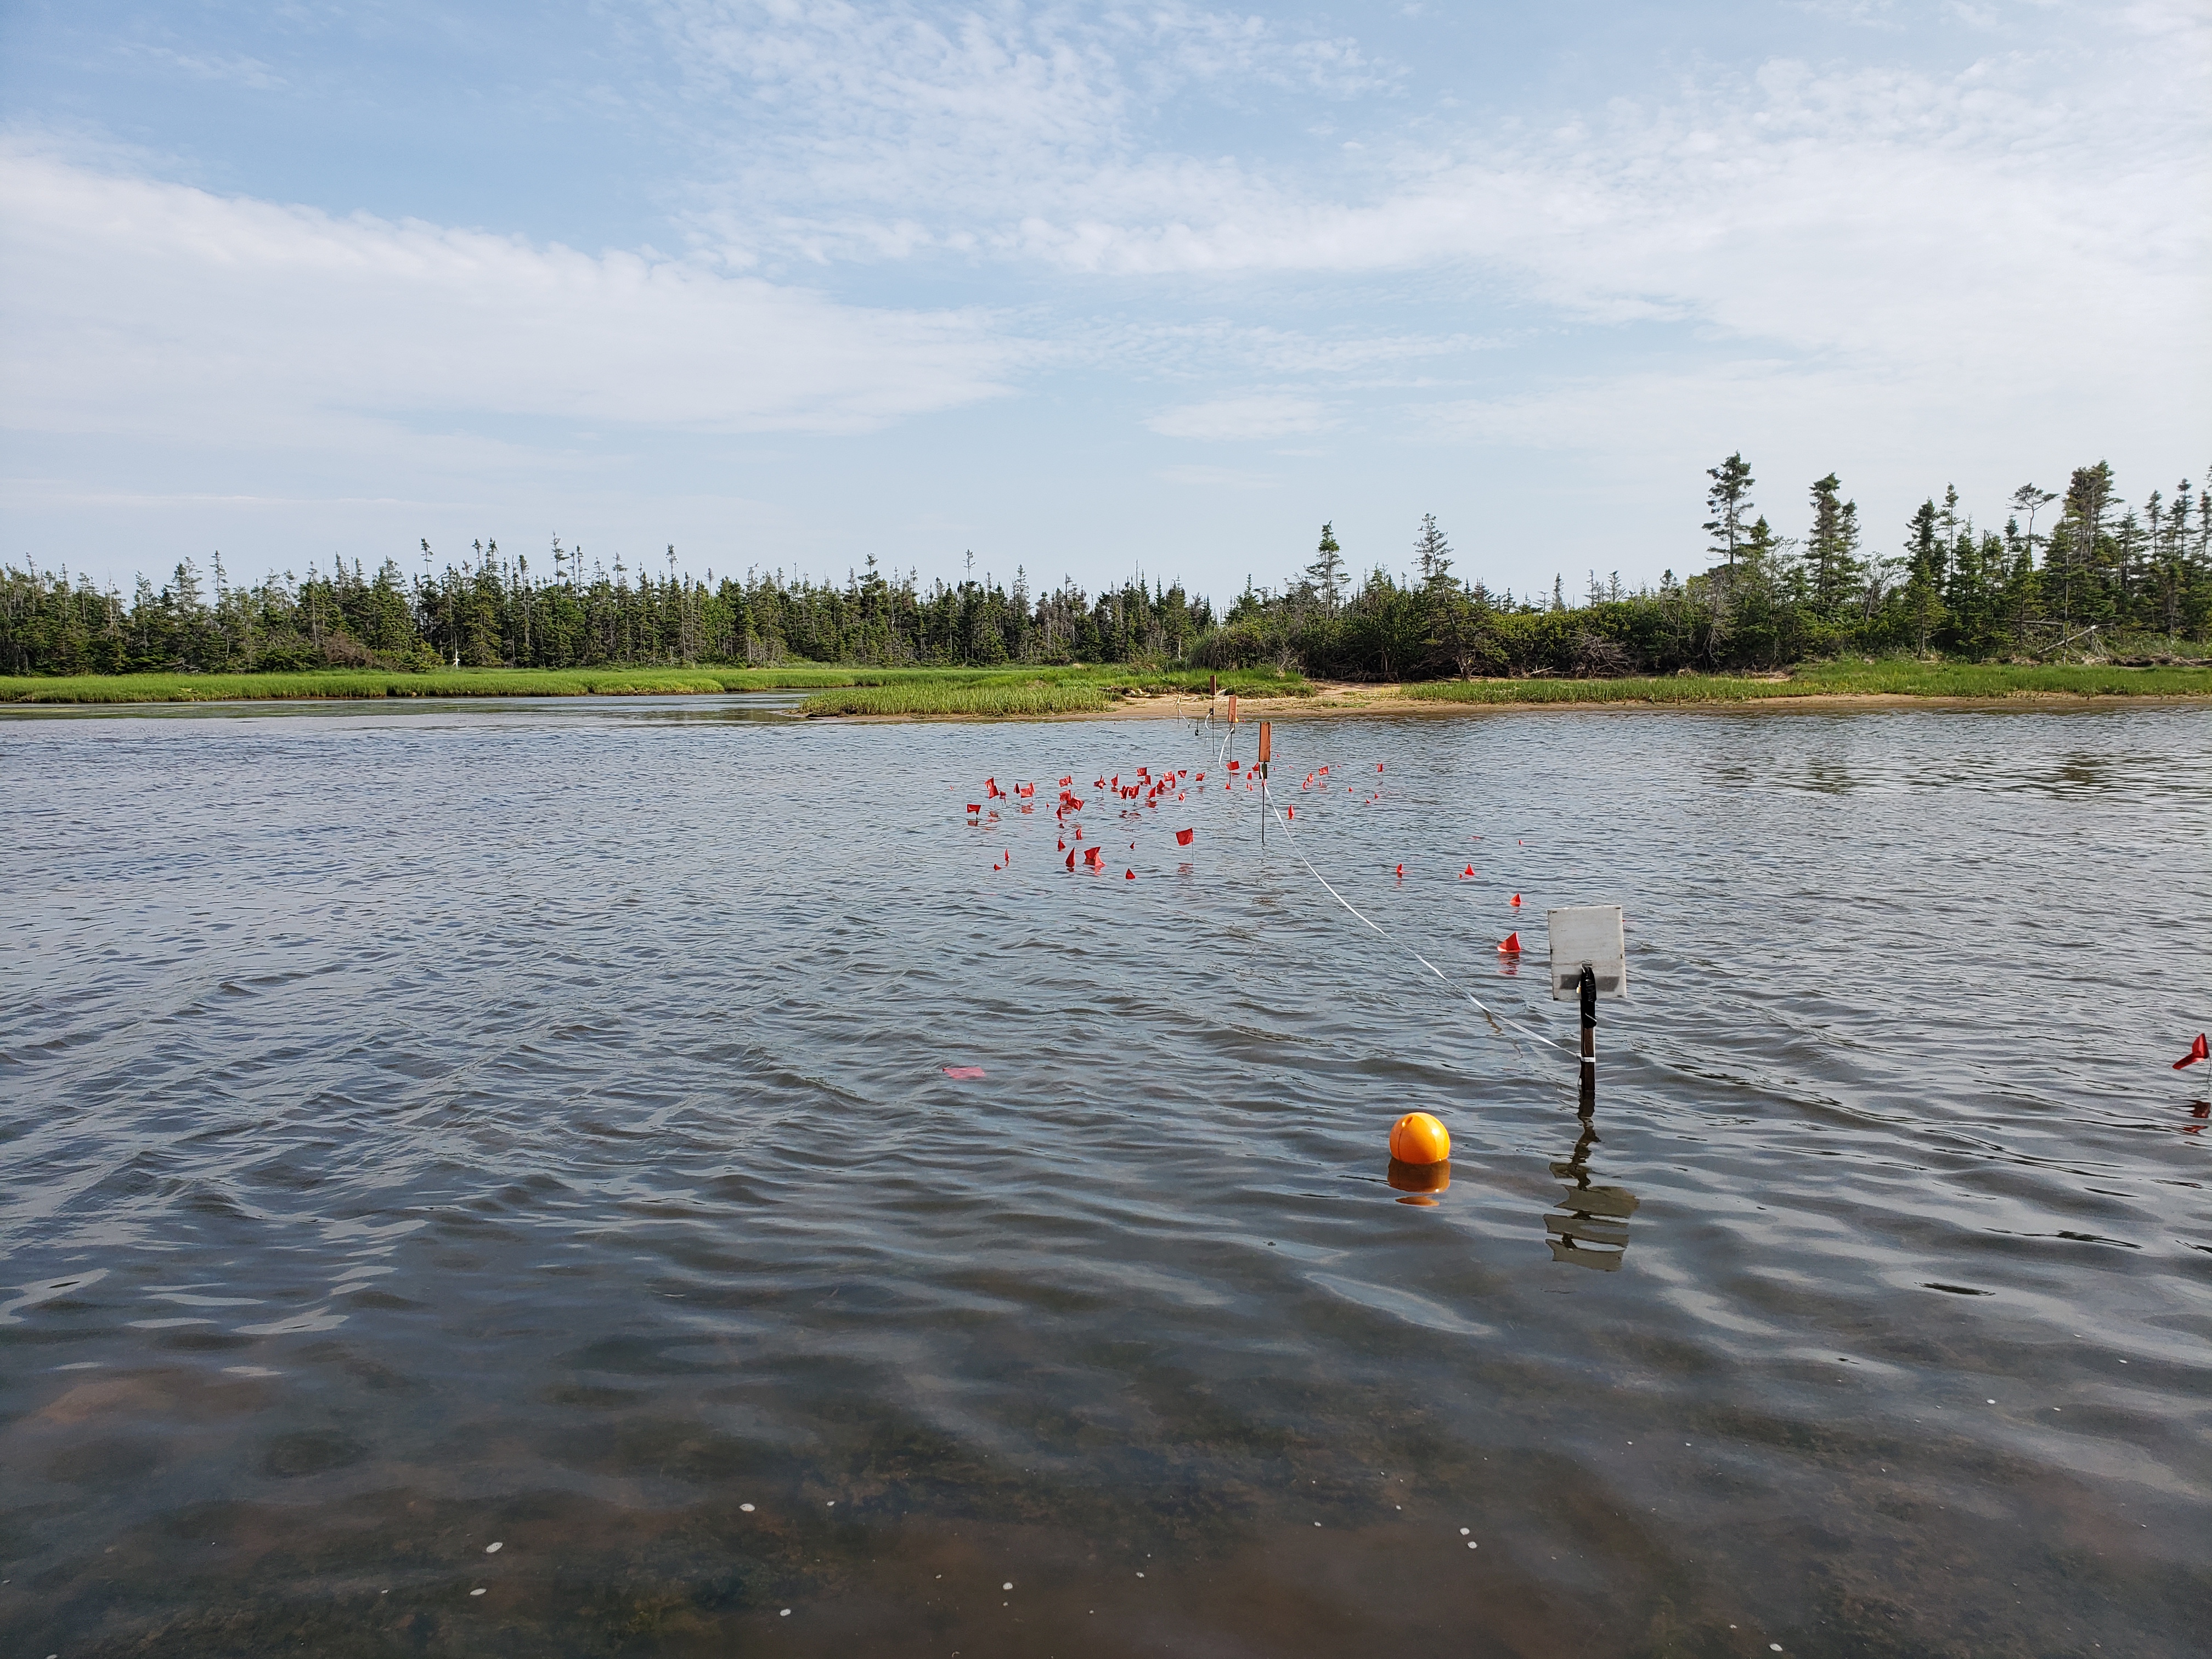 Conducting the annual Irish moss survey. ©Souris and Area Branch of the PEI Wildlife Federation.